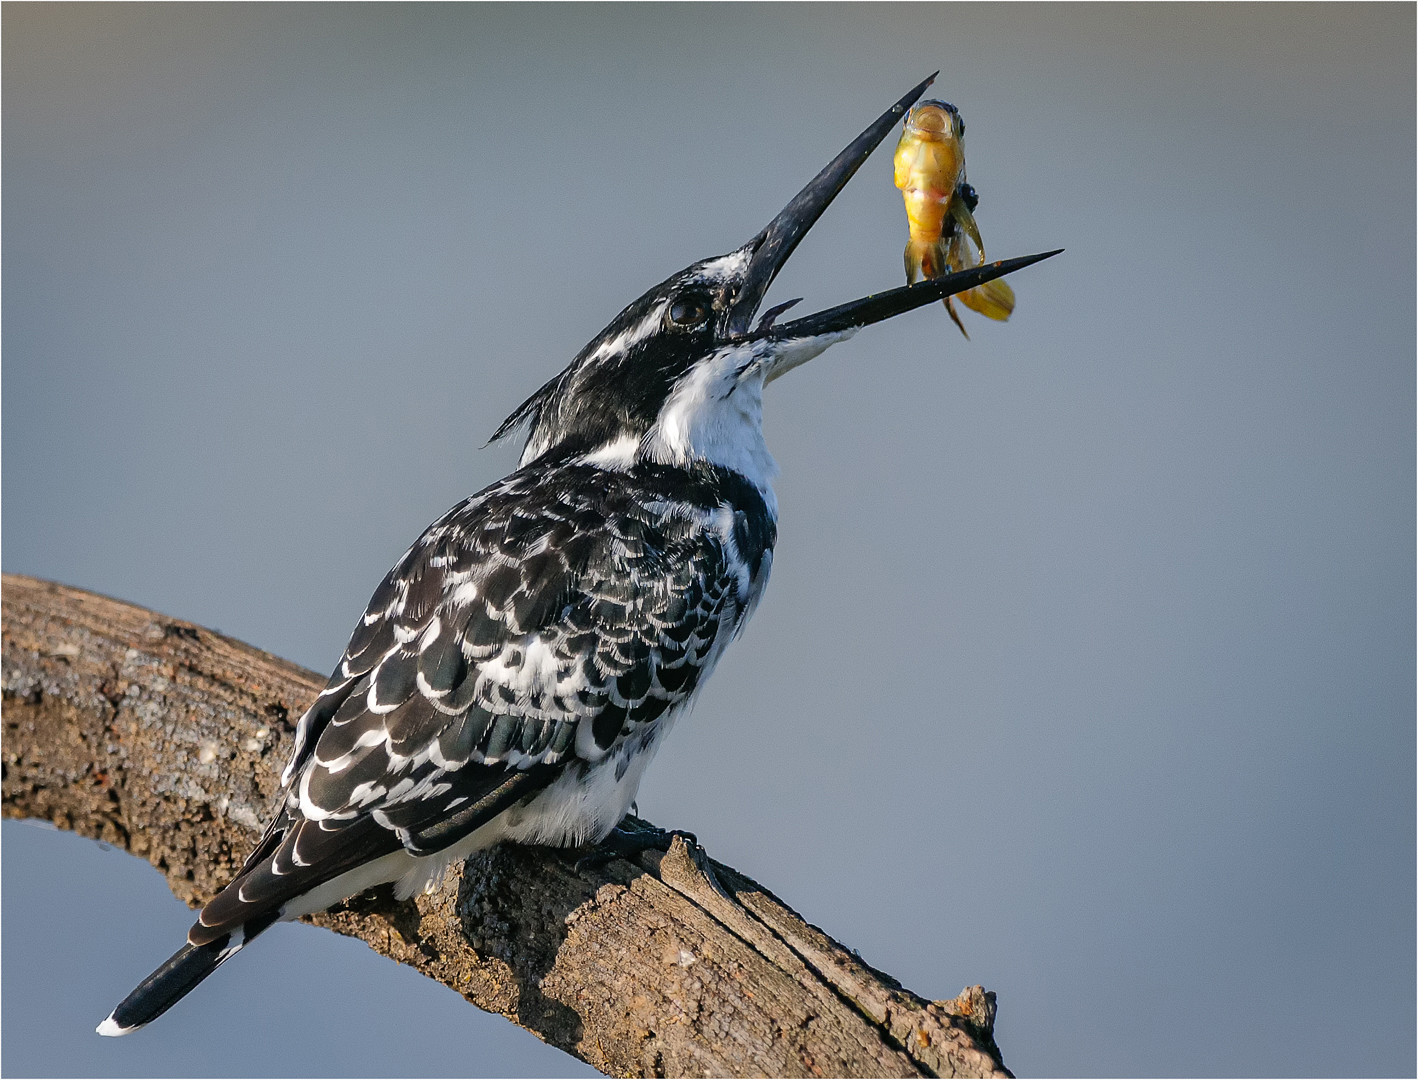 2019 Nature Section "Kingfisher and Prey" by Stephan Labuschagne: Awarded APS Silver Medal